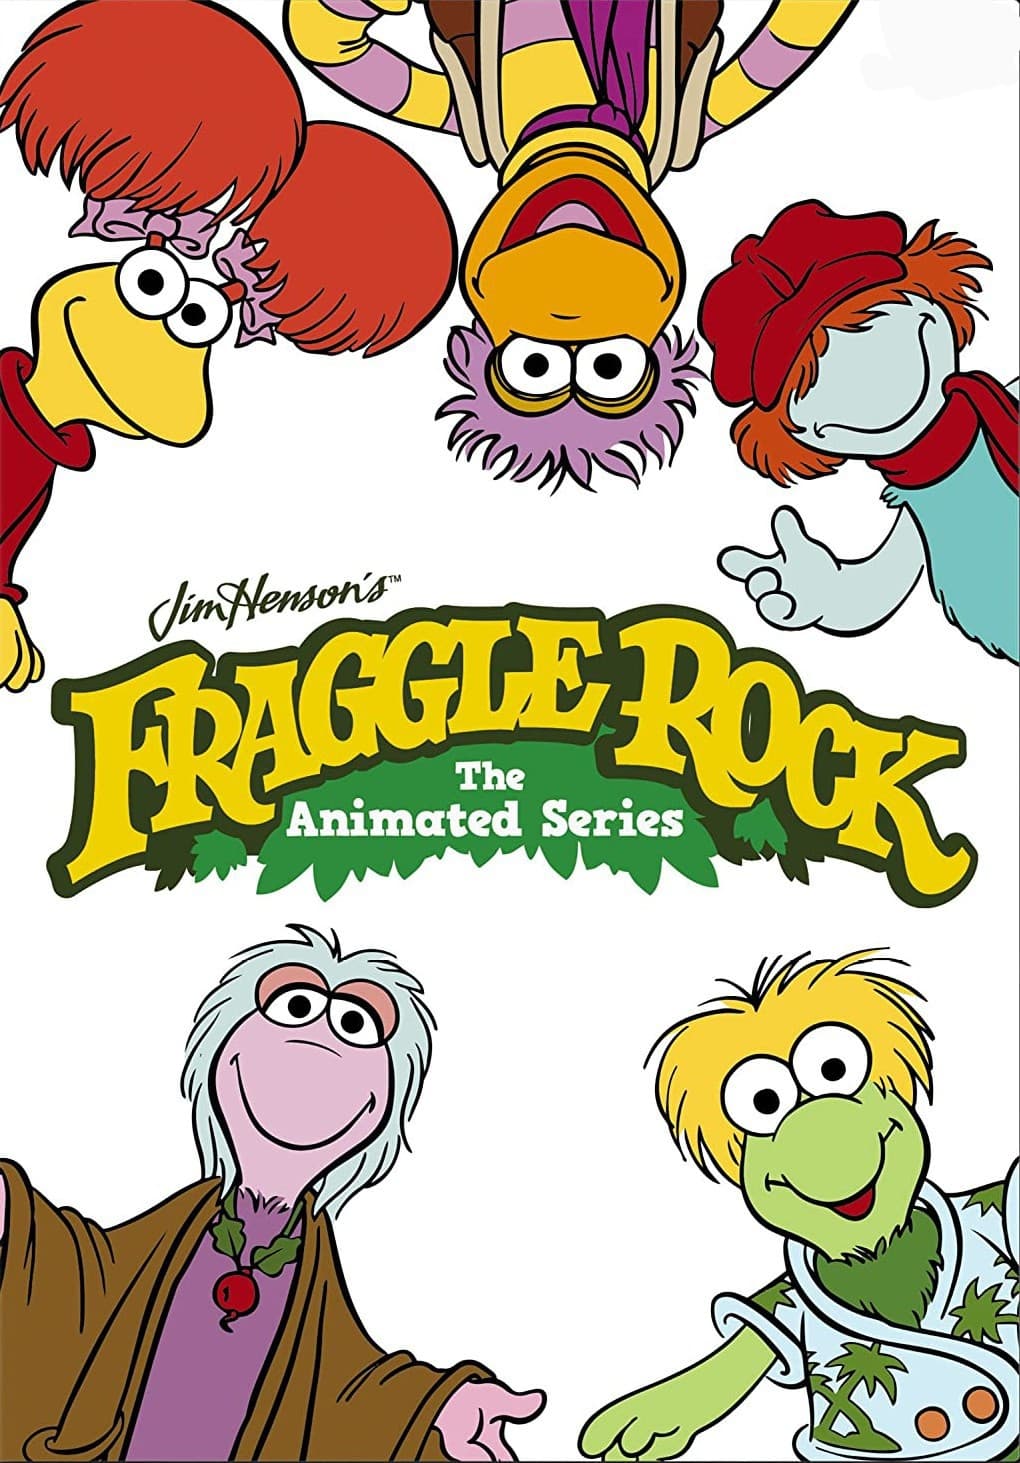 Fraggle Rock: The Animated Series (1987)